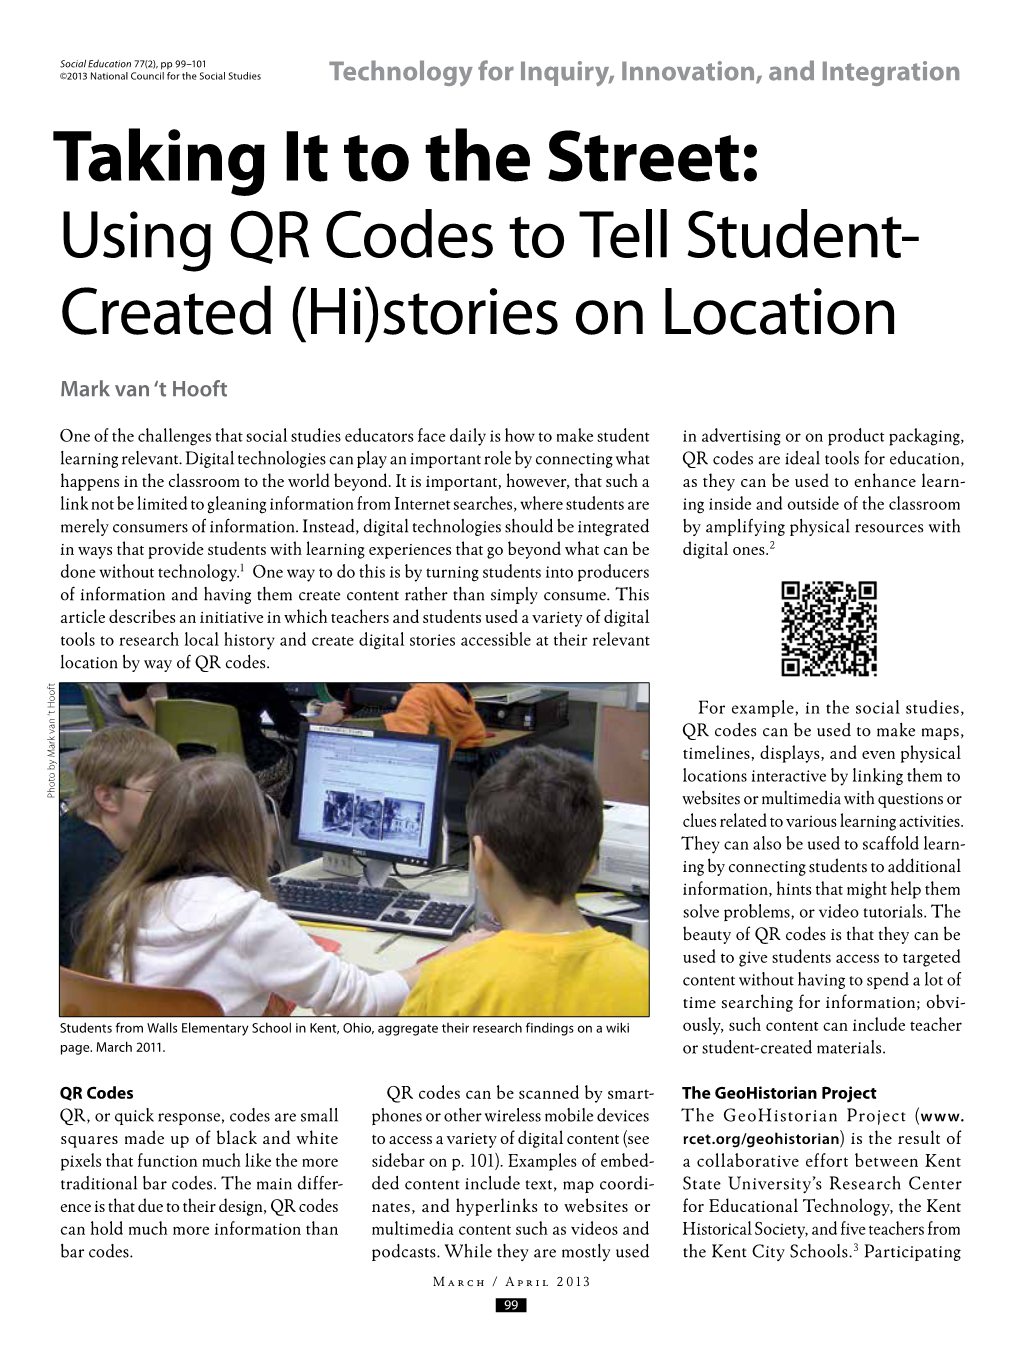 Taking It to the Street: Using QR Codes to Tell Student- Created (Hi)Stories on Location